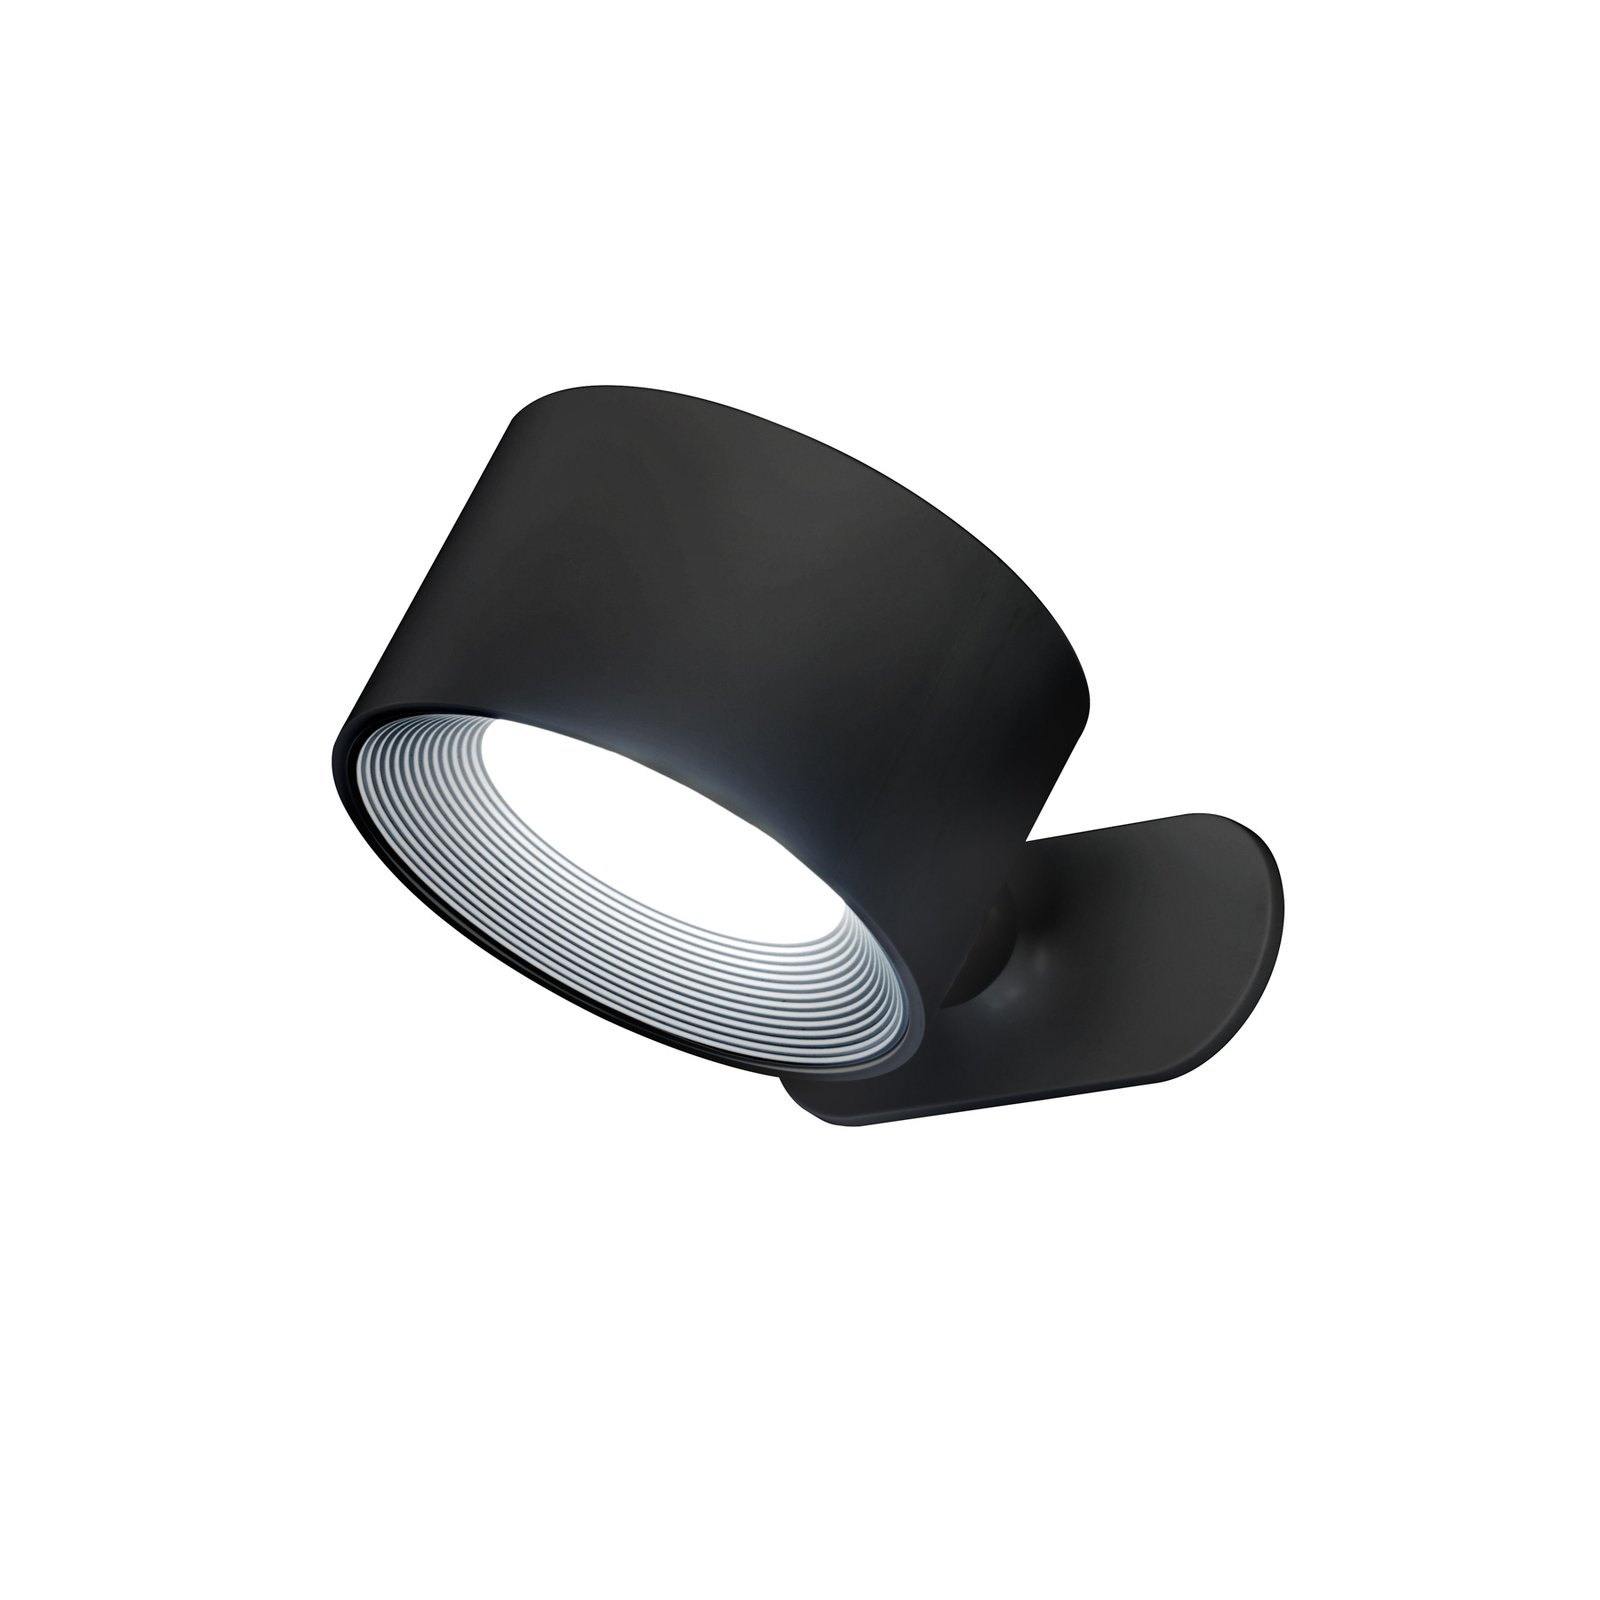 LED wall light Magnetics, black, CCT, with magnet